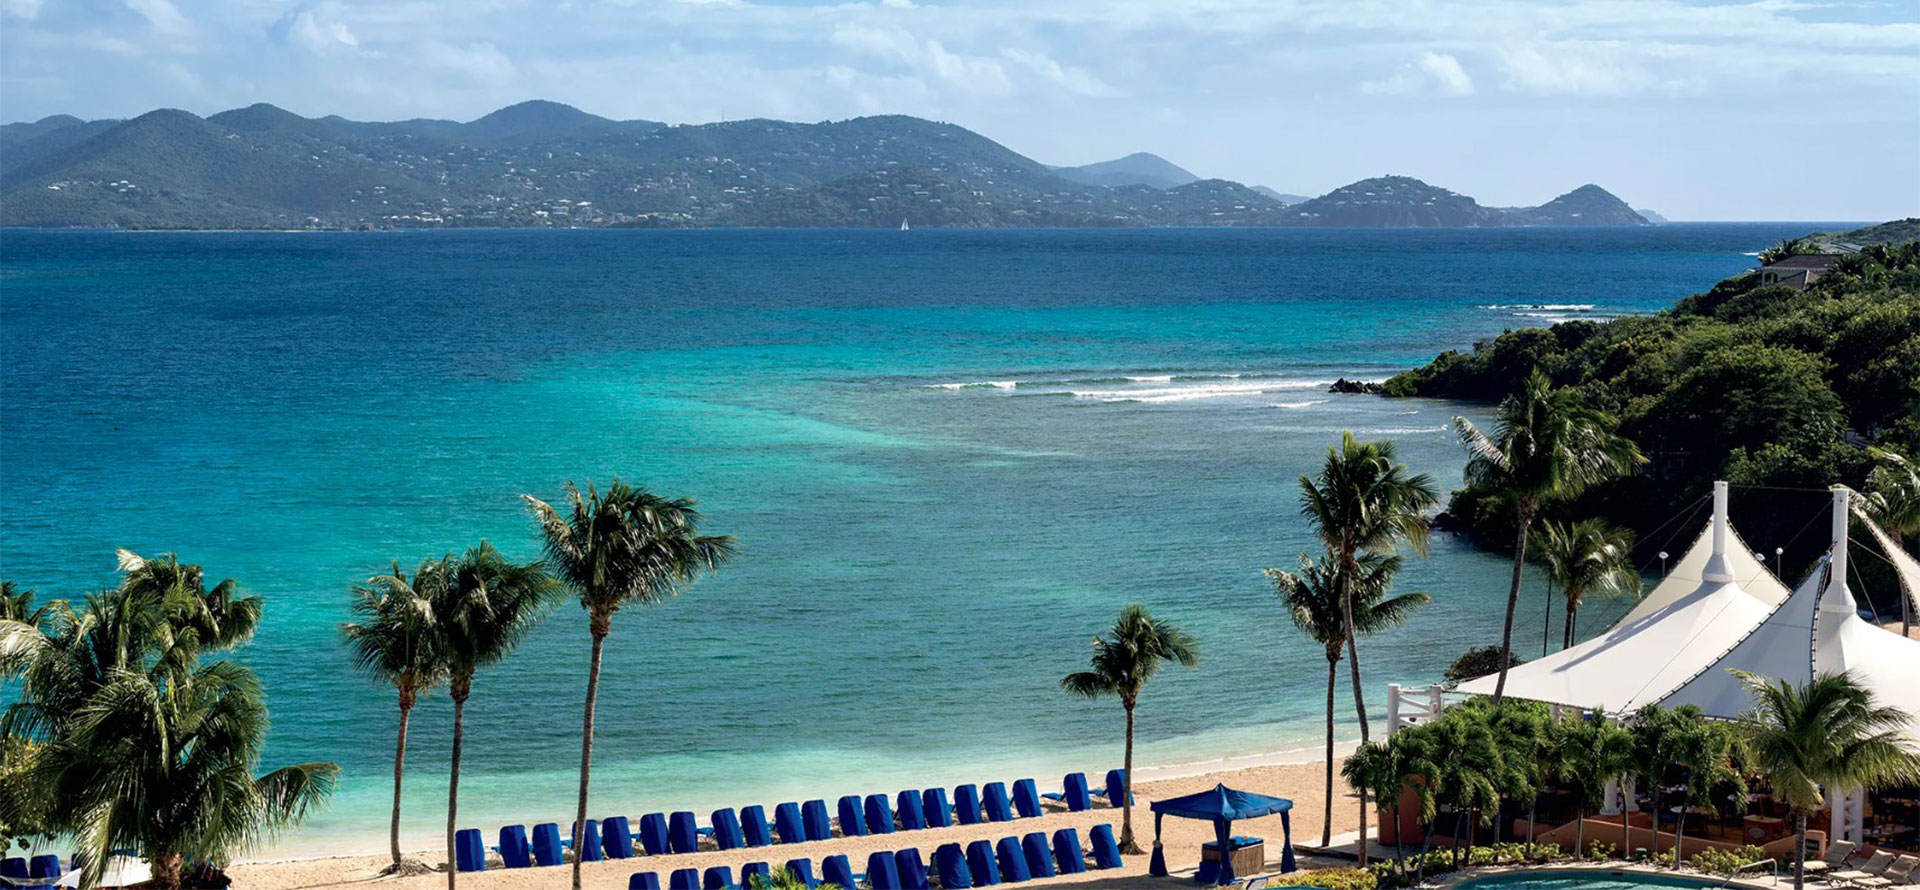 St thomas all-inclusive adults only resort and beach.